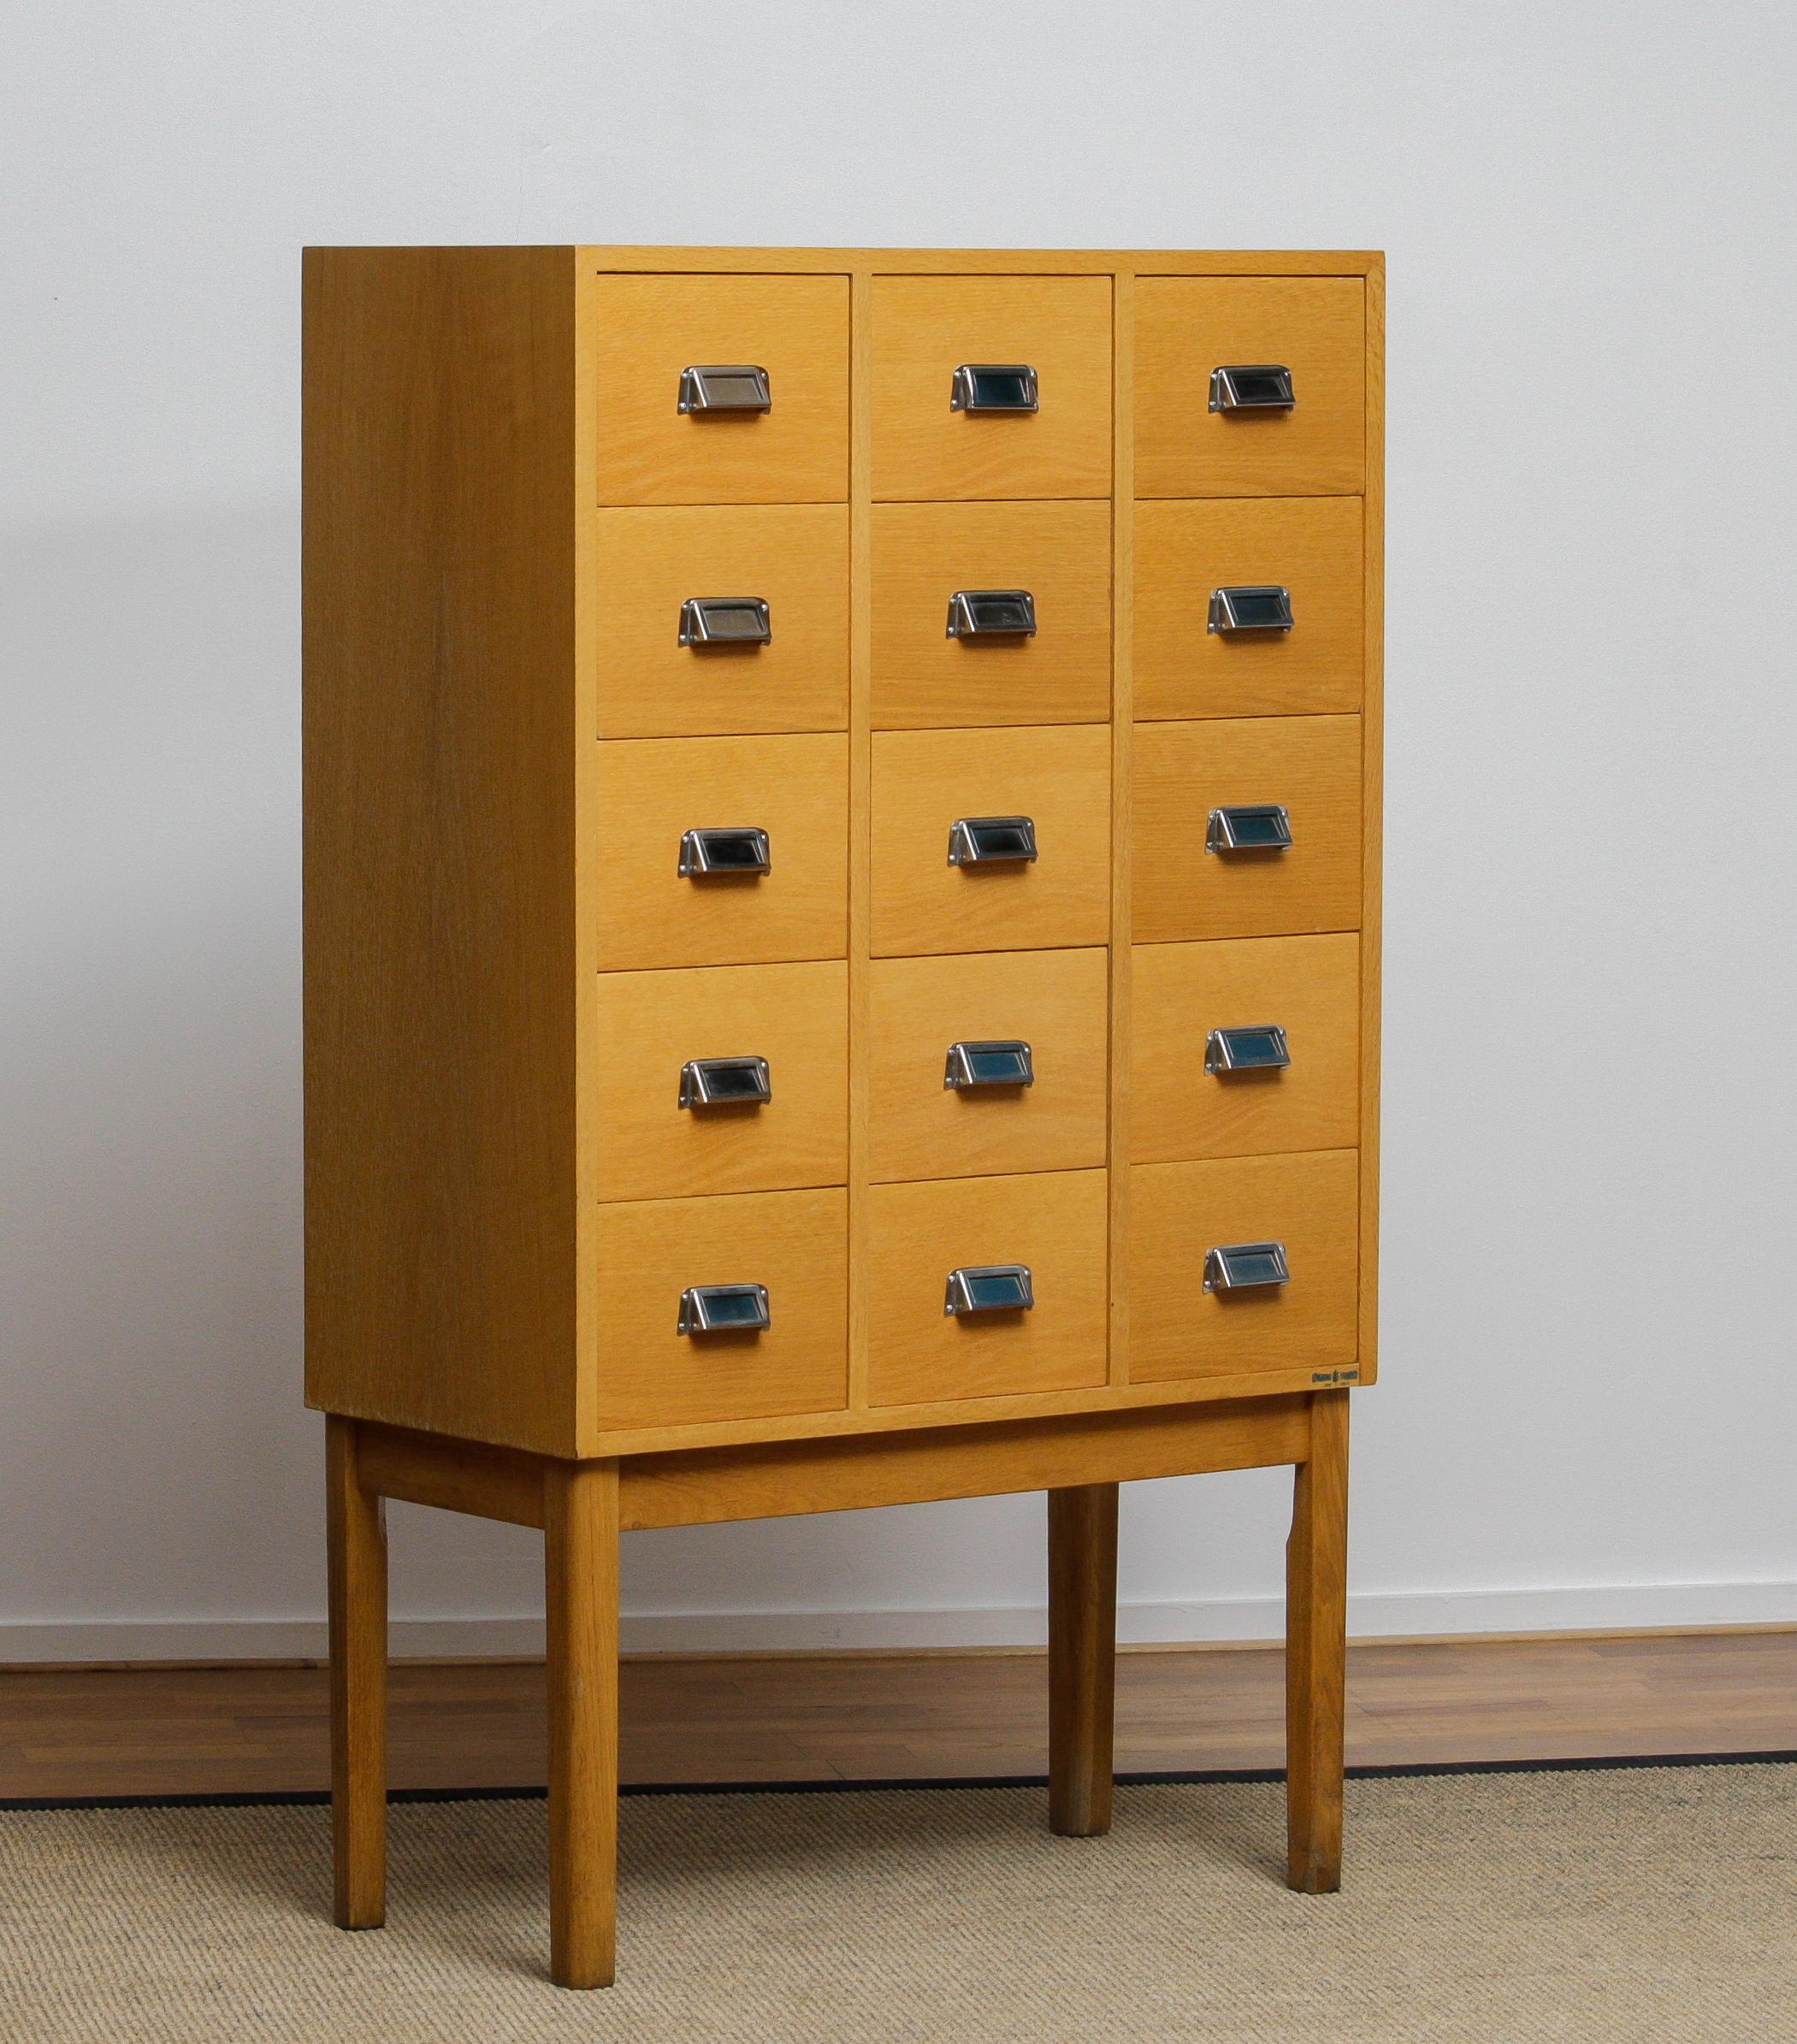 Beautiful and very decorative high legged oak drawer / filling cabinet by Lövgrens Sweden from the 1970s.
Fifteen beech drawers veneered in oak in, overall, good condition.